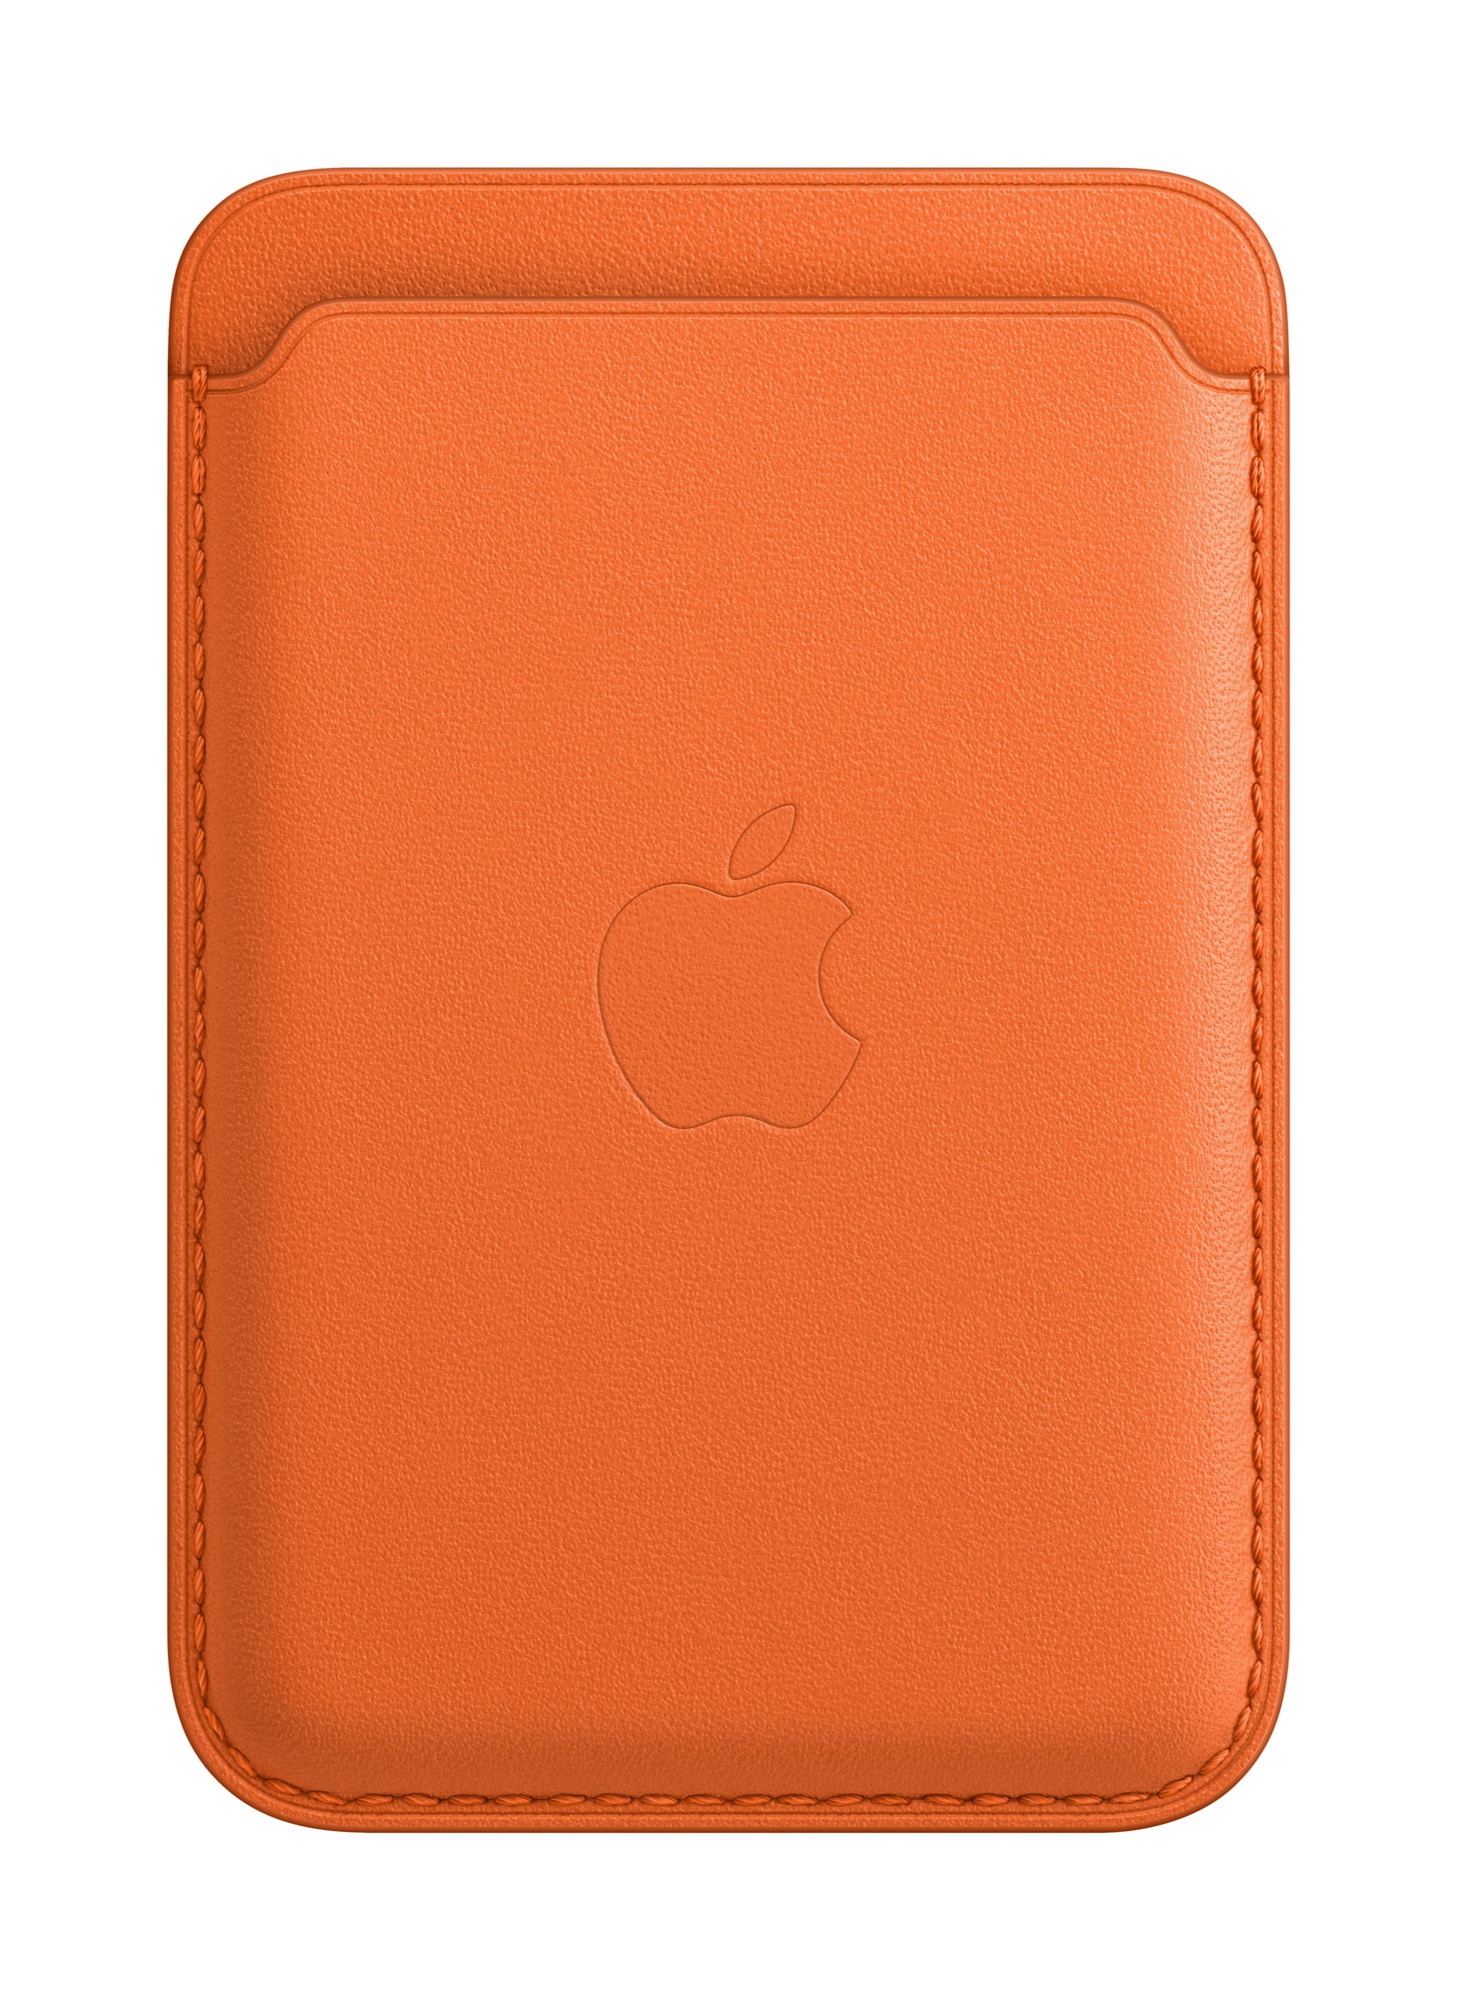 APPLE iPhone Leather Wallet with MagSafe